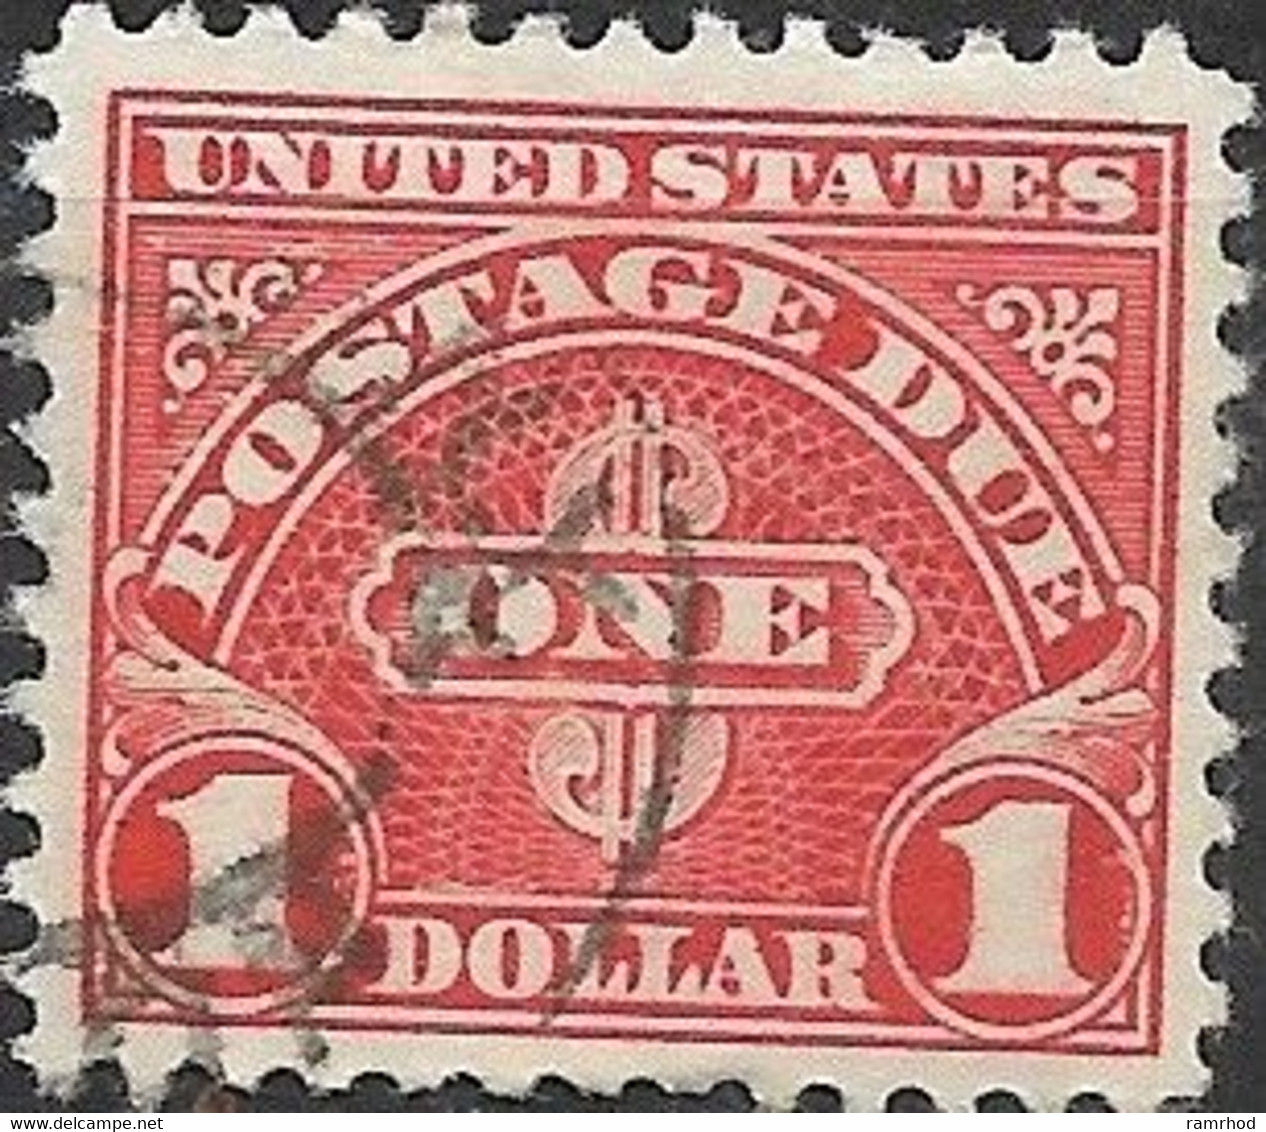 USA 1930 Postage Due - $1 - Red FU - Strafport